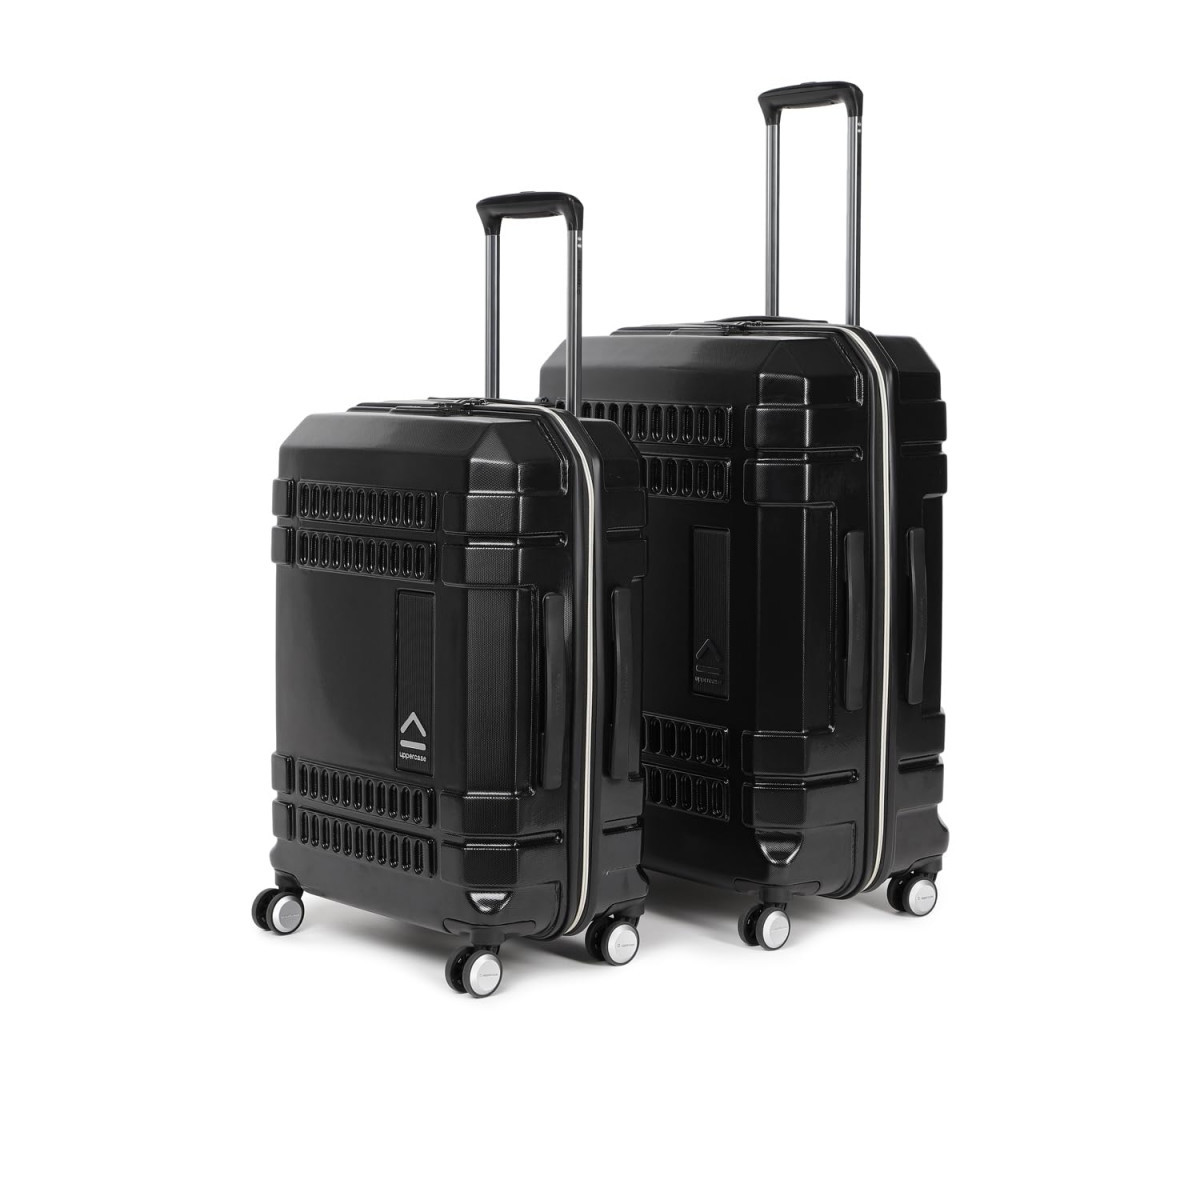 uppercase Bullet Trolley Bag Set Of 2 ML Sustainable Check-In Luggage Hardsided Polycarbonate Printed Luggage Anti-Scratch 2000 Days Warranty Black 32 X 54 X 74 Cm Spinner